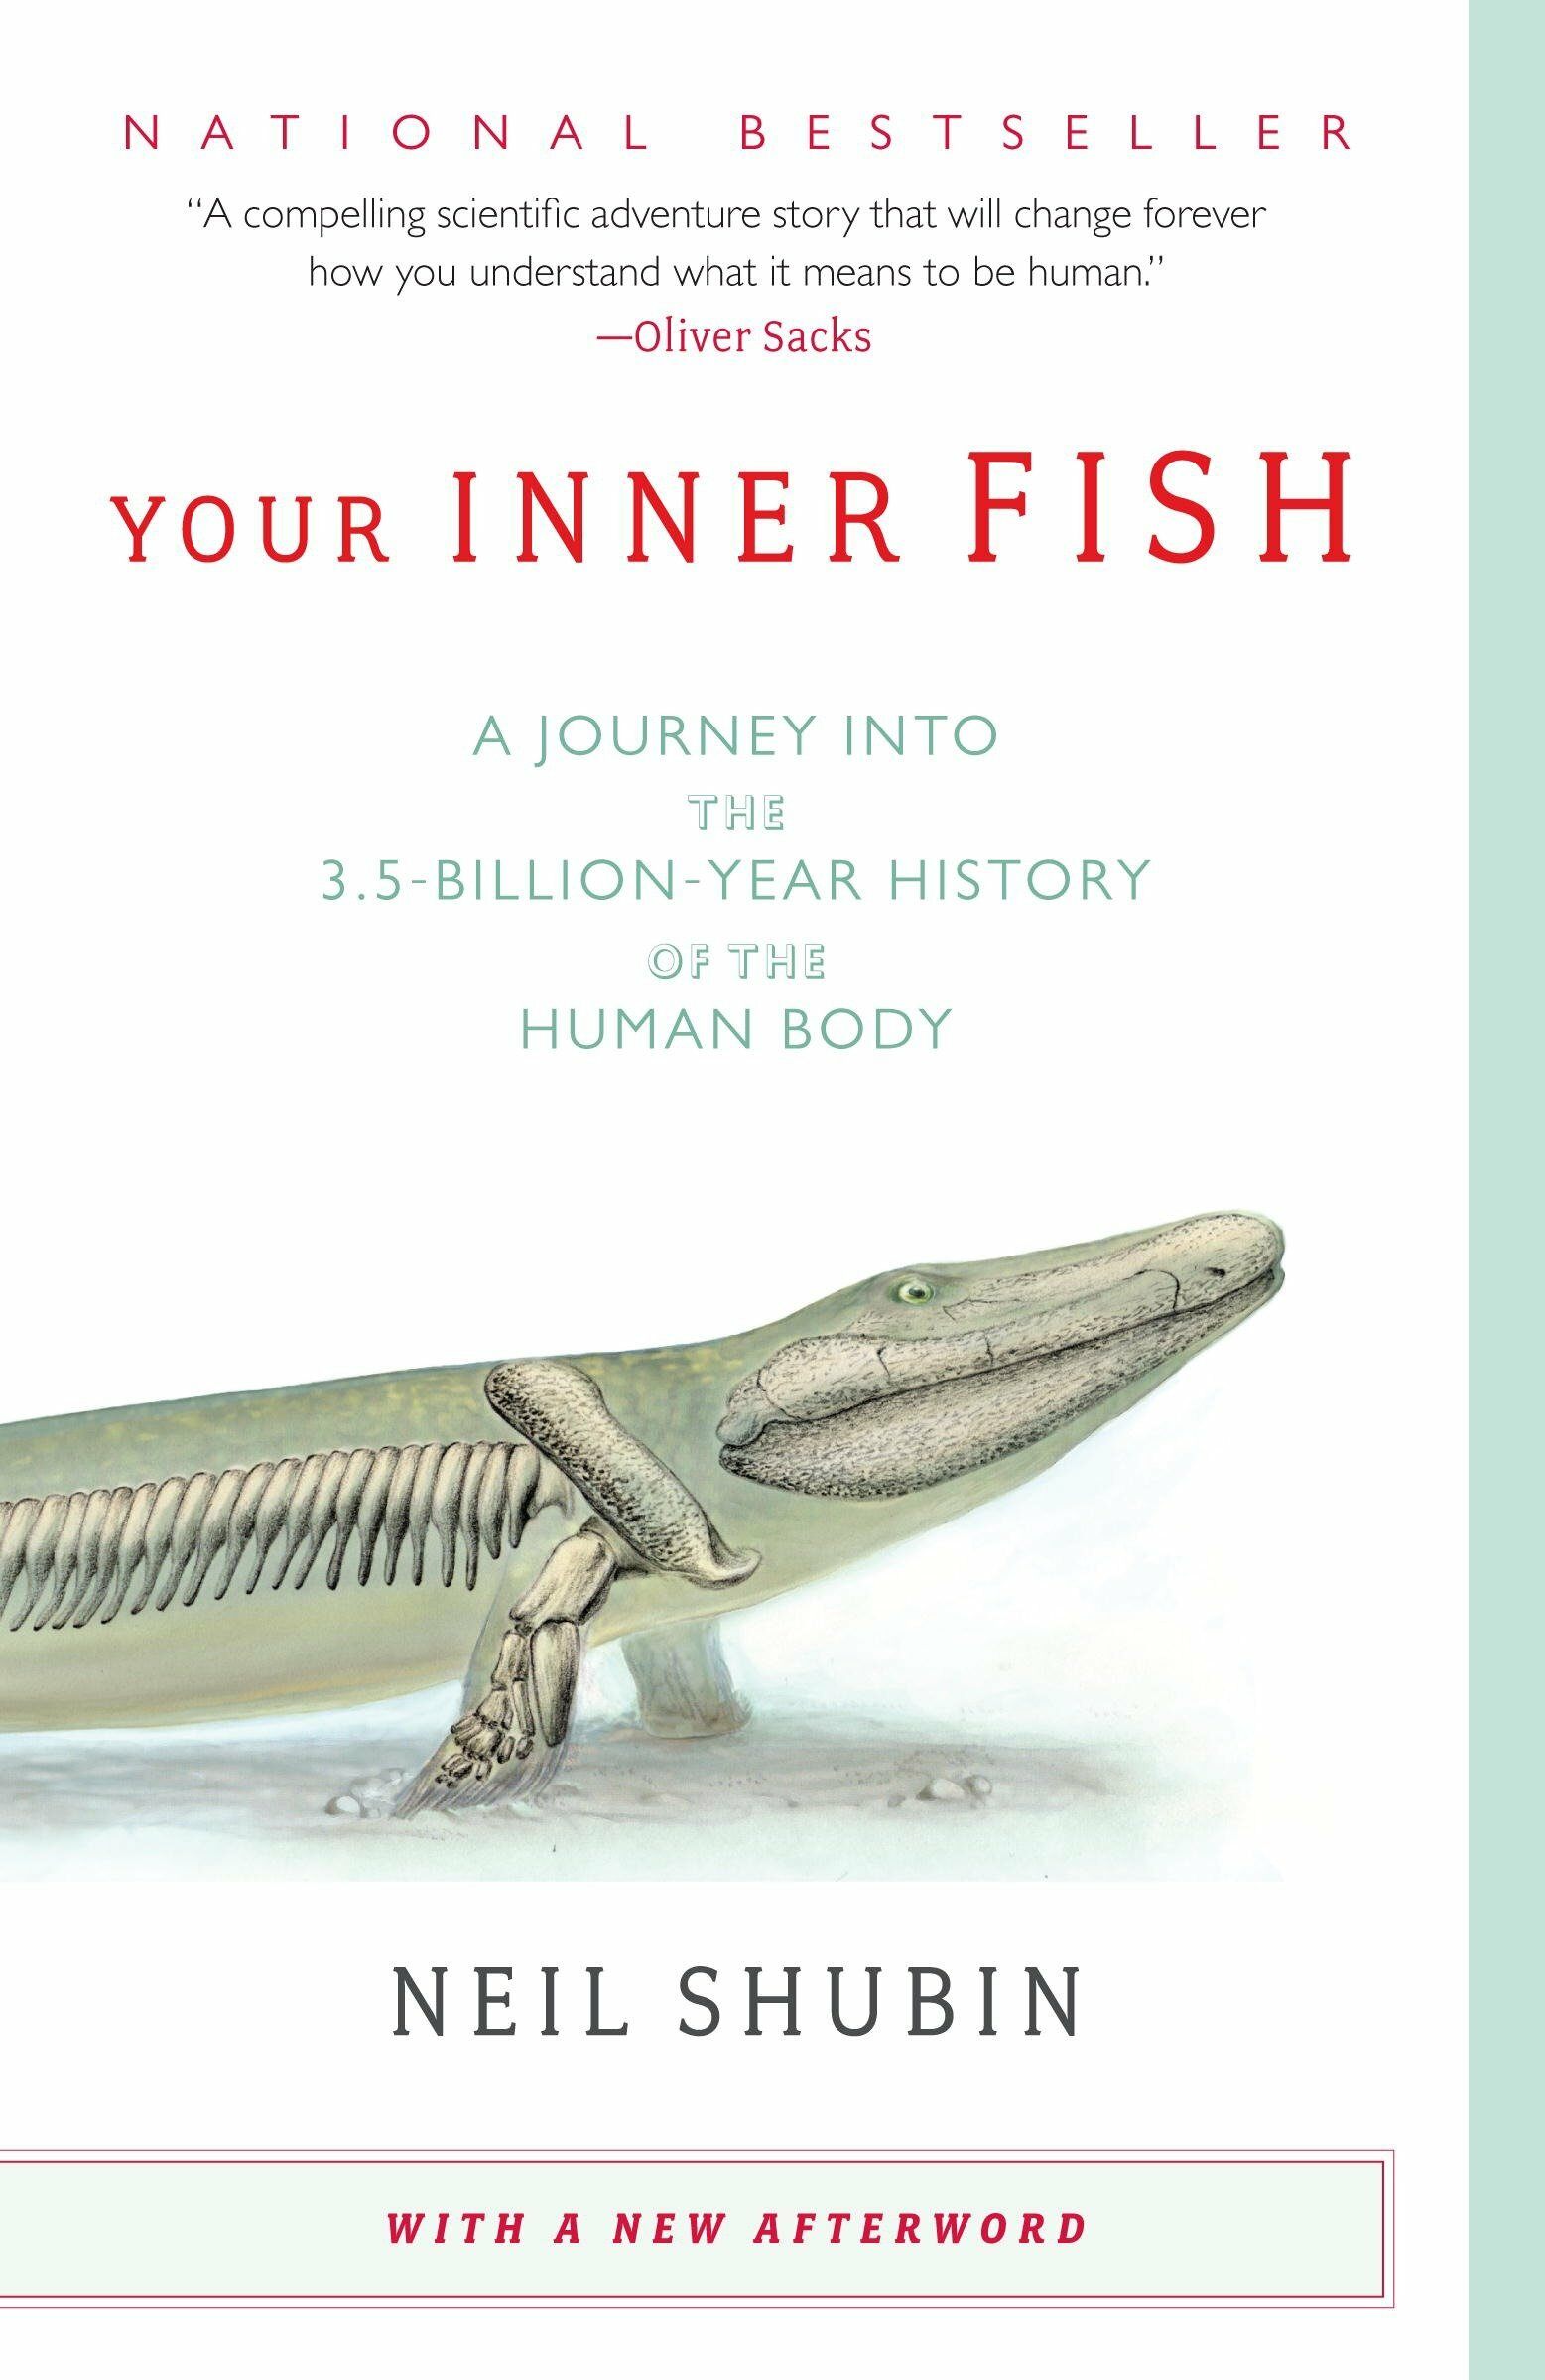 Your Inner Fish: A Journey Into the 3.5-Billion-Year History of the Human Body (Paperback)